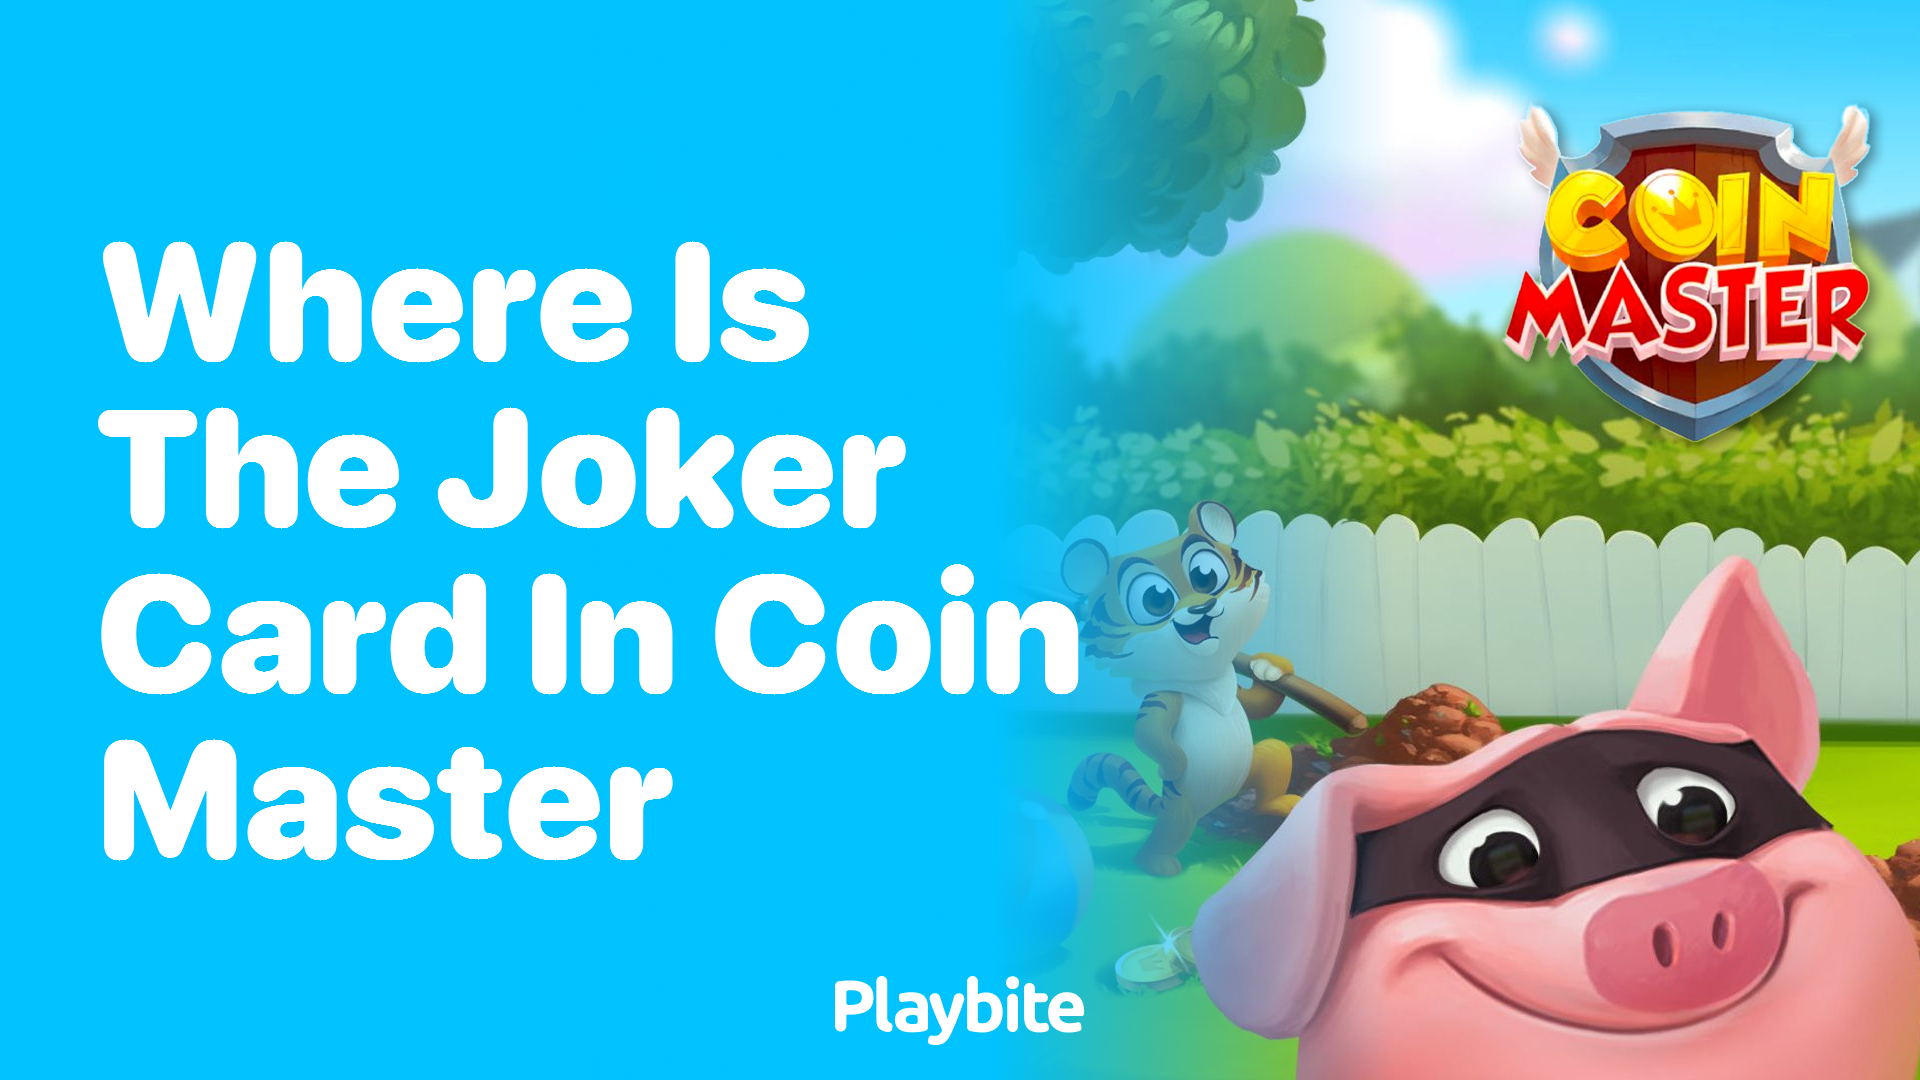 Where is the Joker Card in Coin Master?